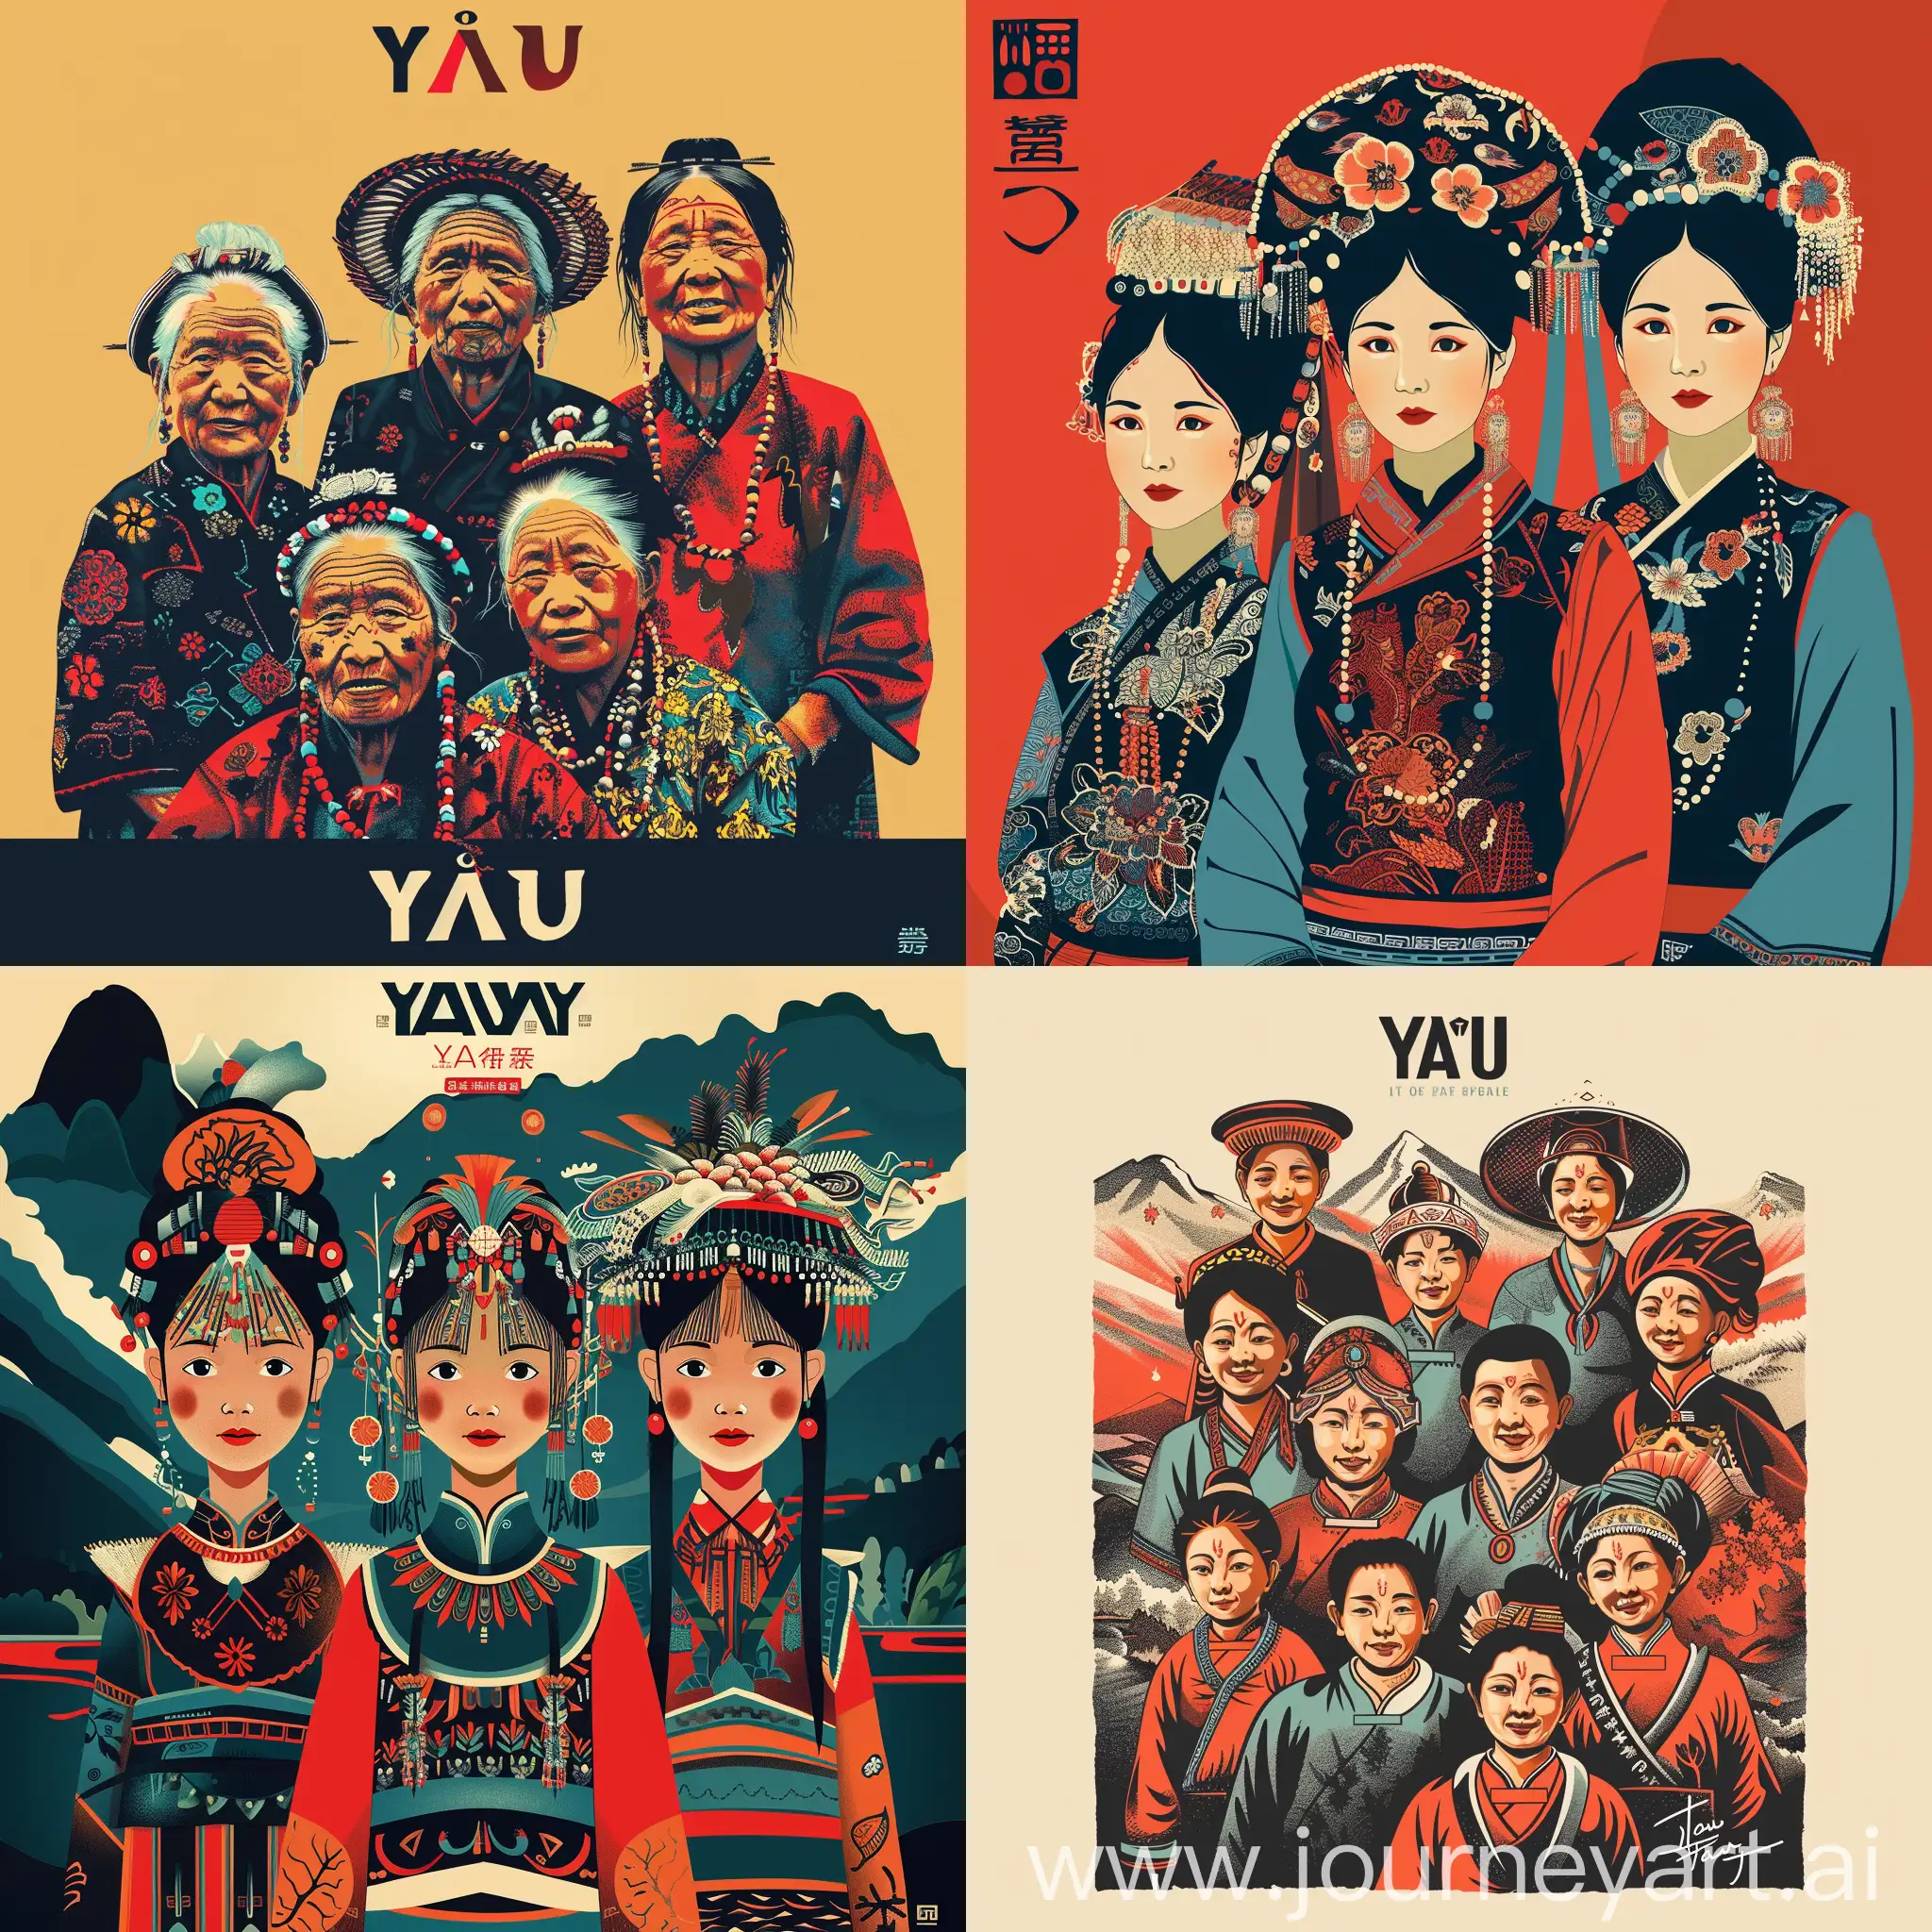 Colorful-Chinese-Yao-Ethnic-Group-Poster-Design